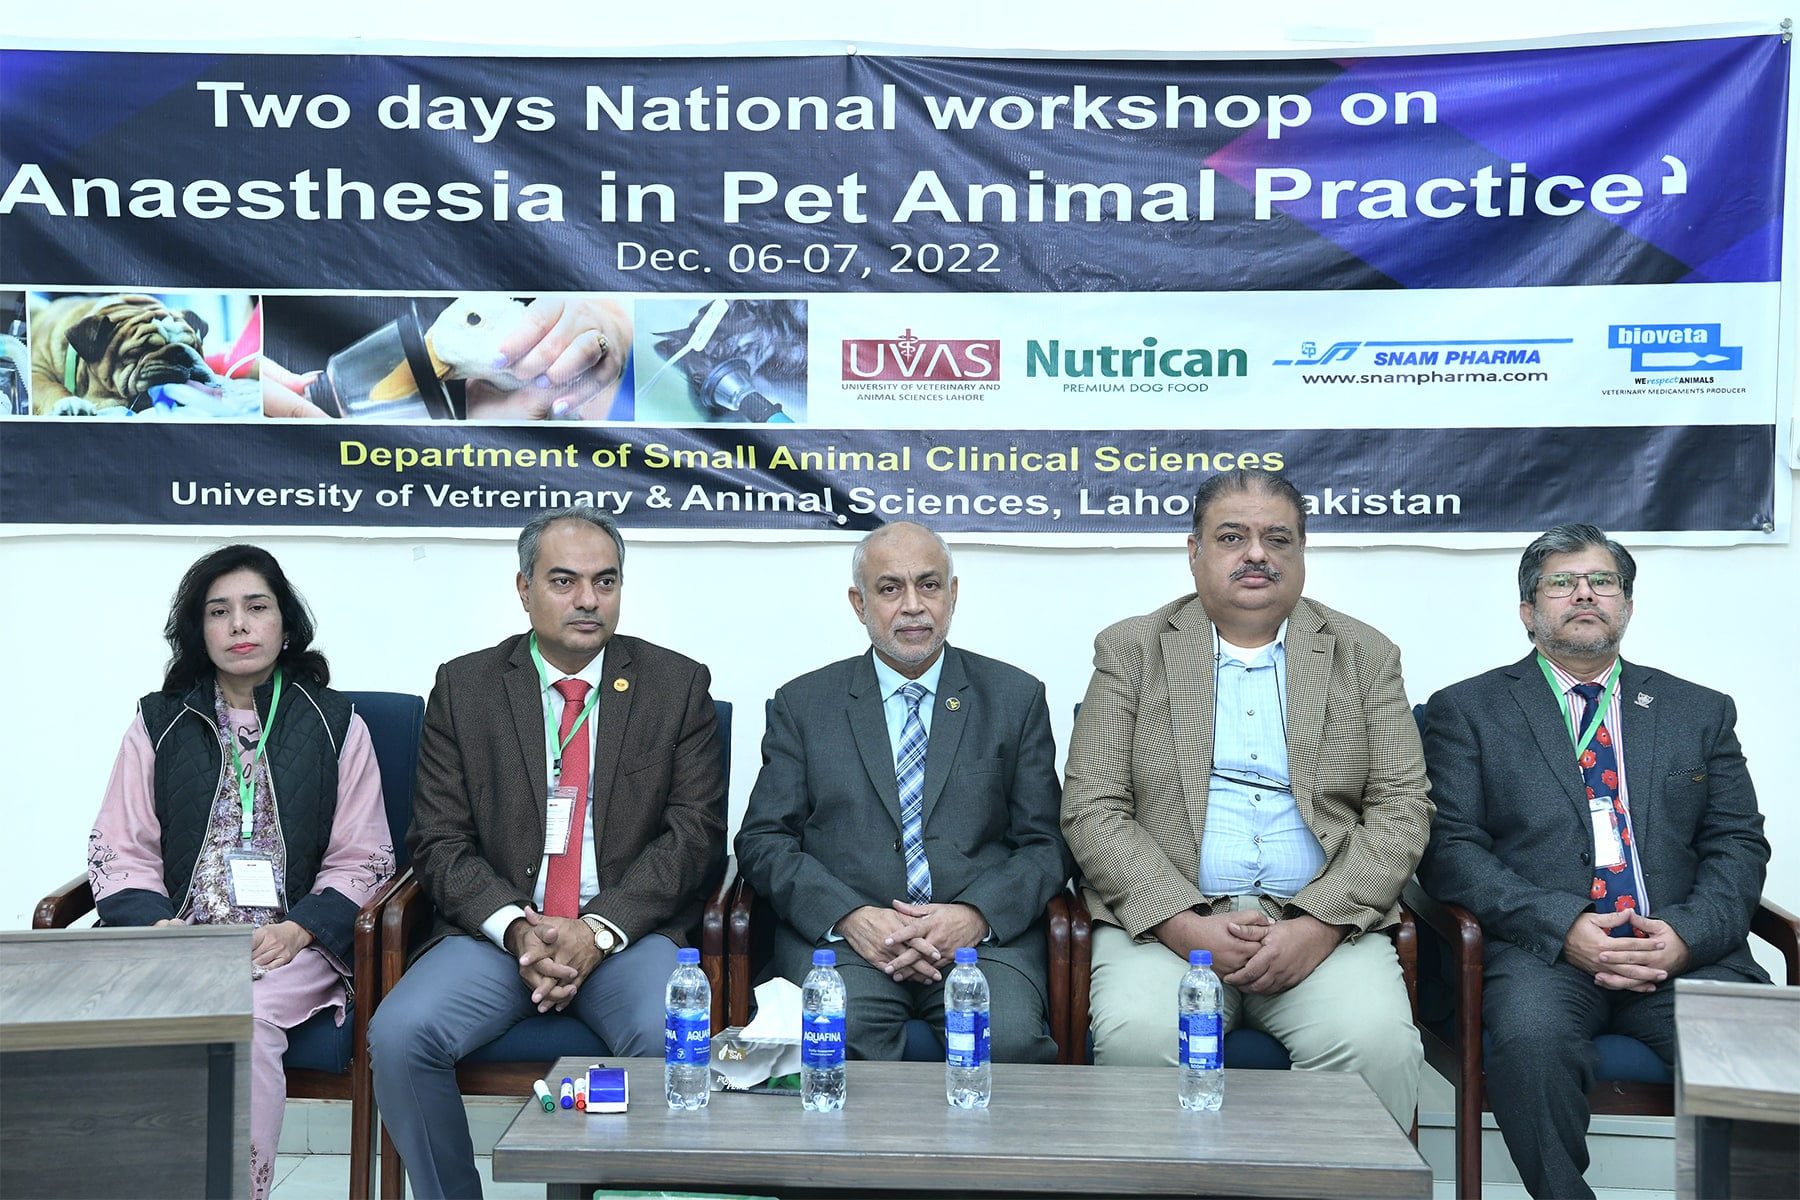 2-Days National Workshop on ‘Anaesthesia in Pet Animal Practice’ complete at UVAS